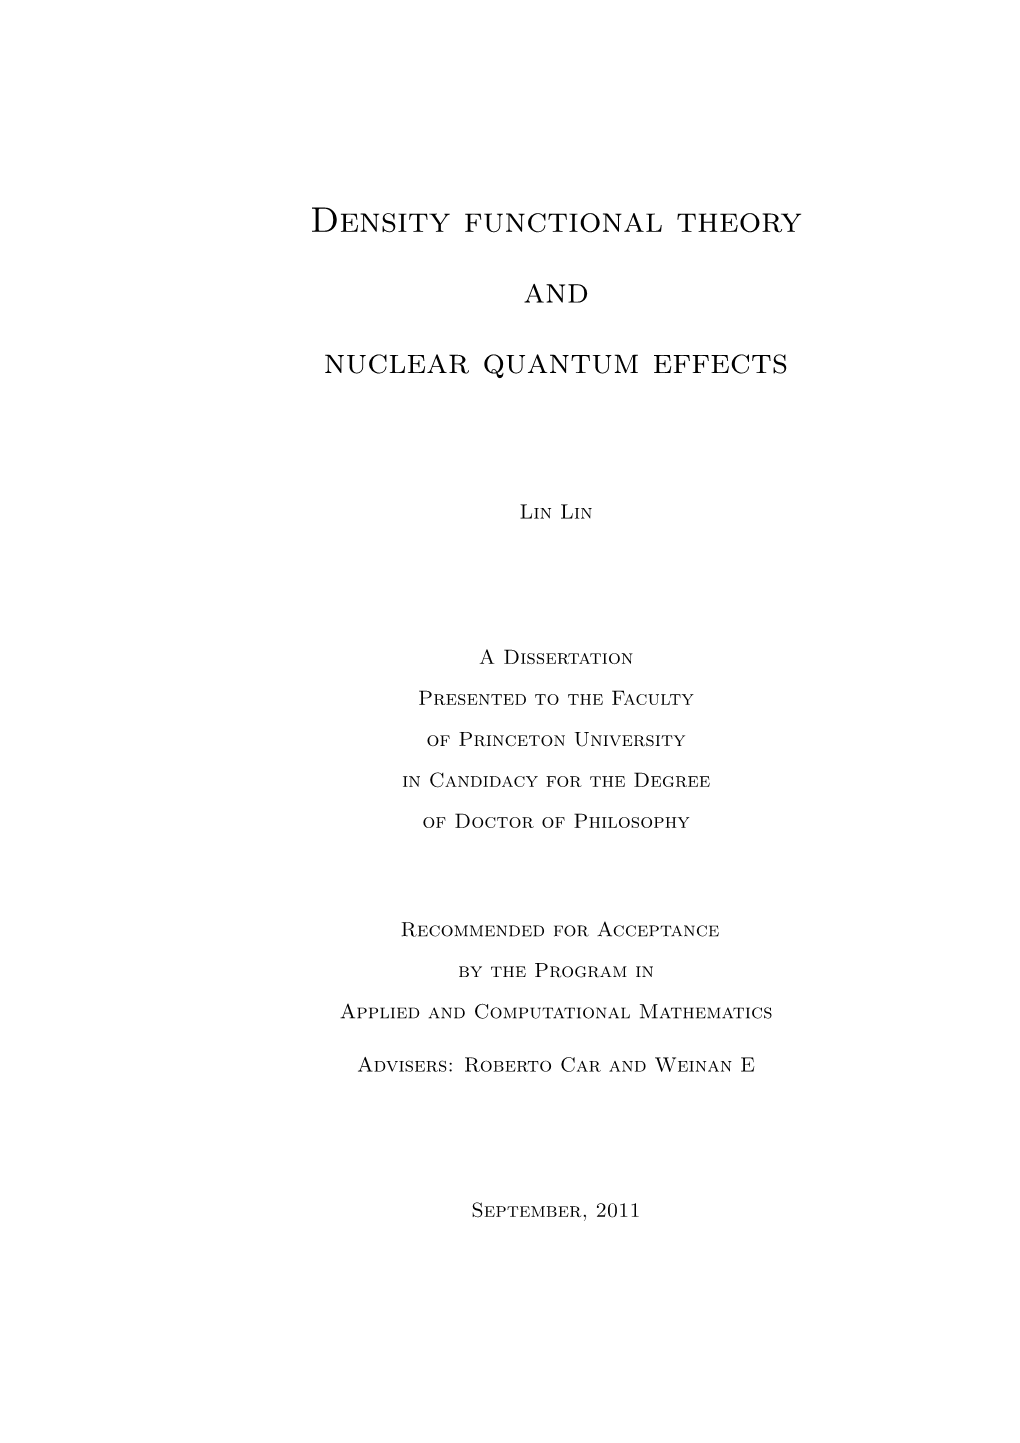 Density Functional Theory and Nuclear Quantum Effects [.Pdf]